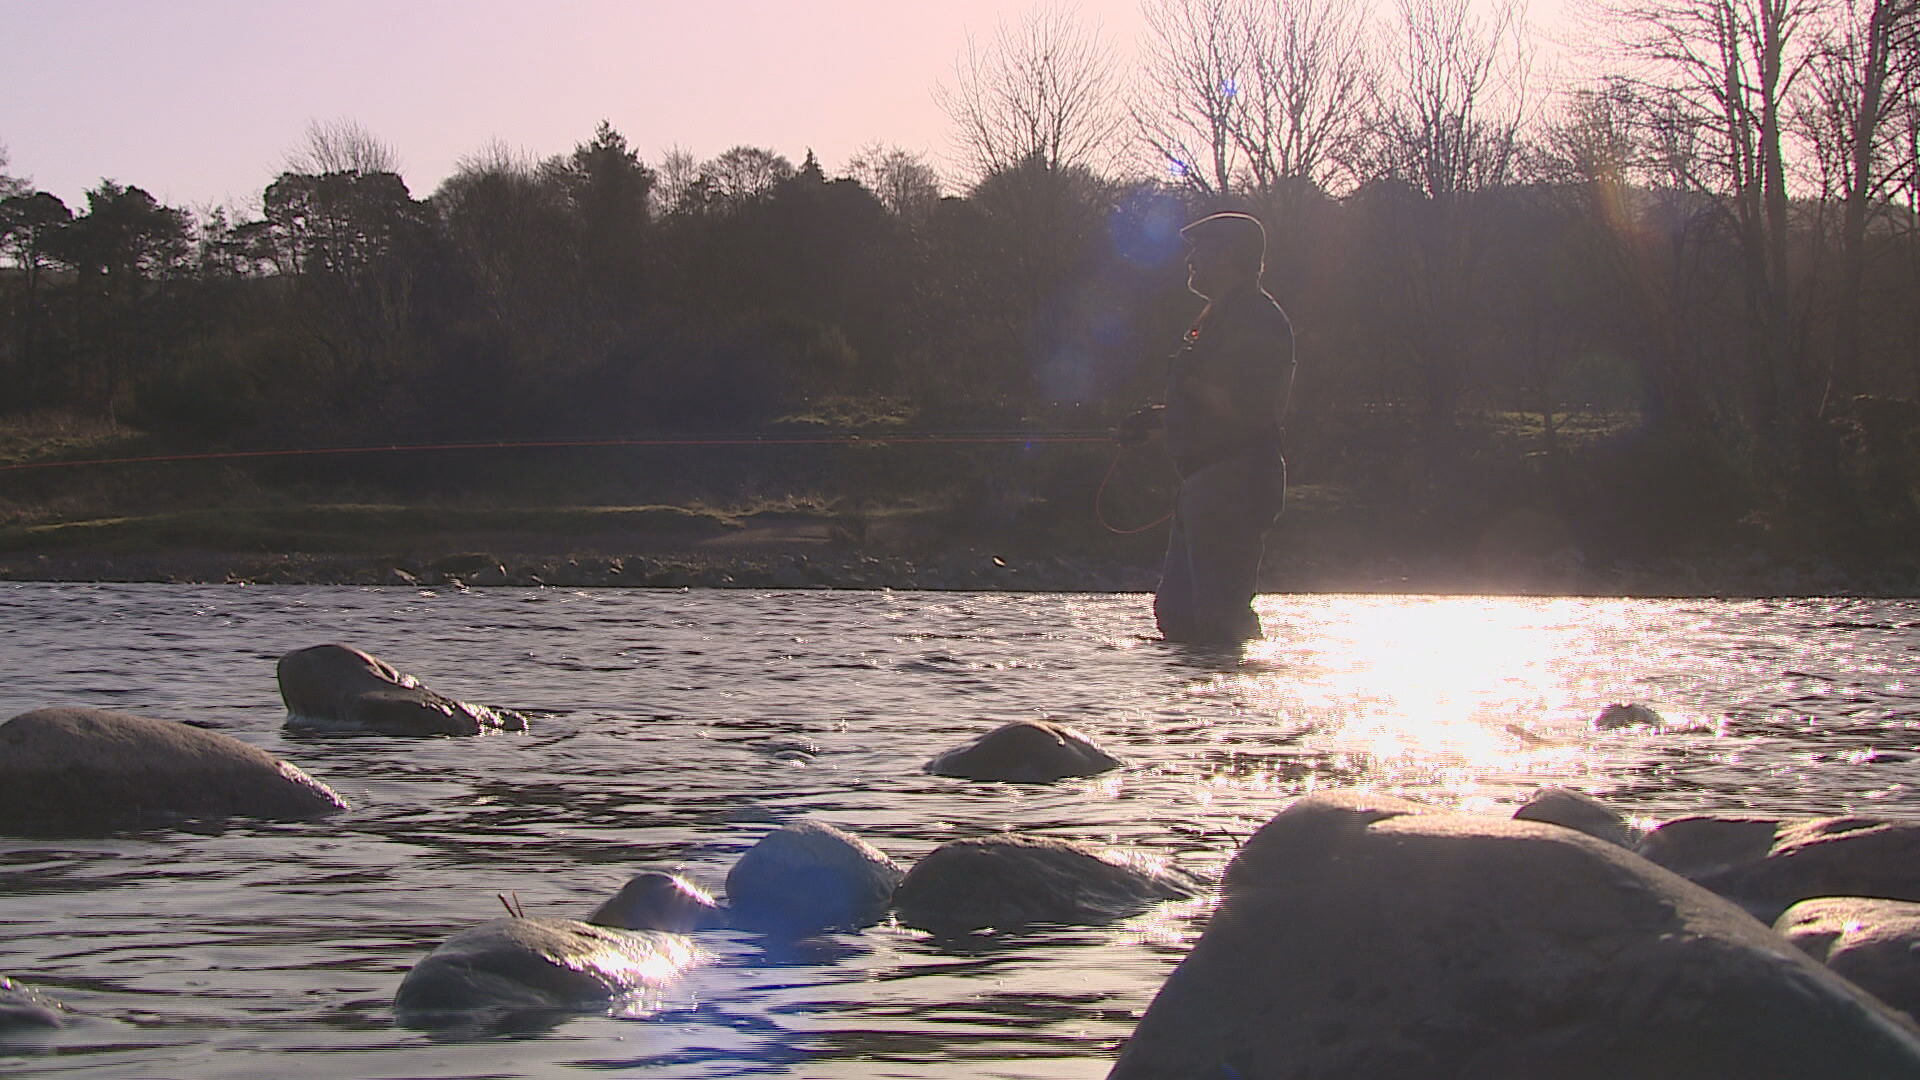 Fishing season is now underway at the River Dee